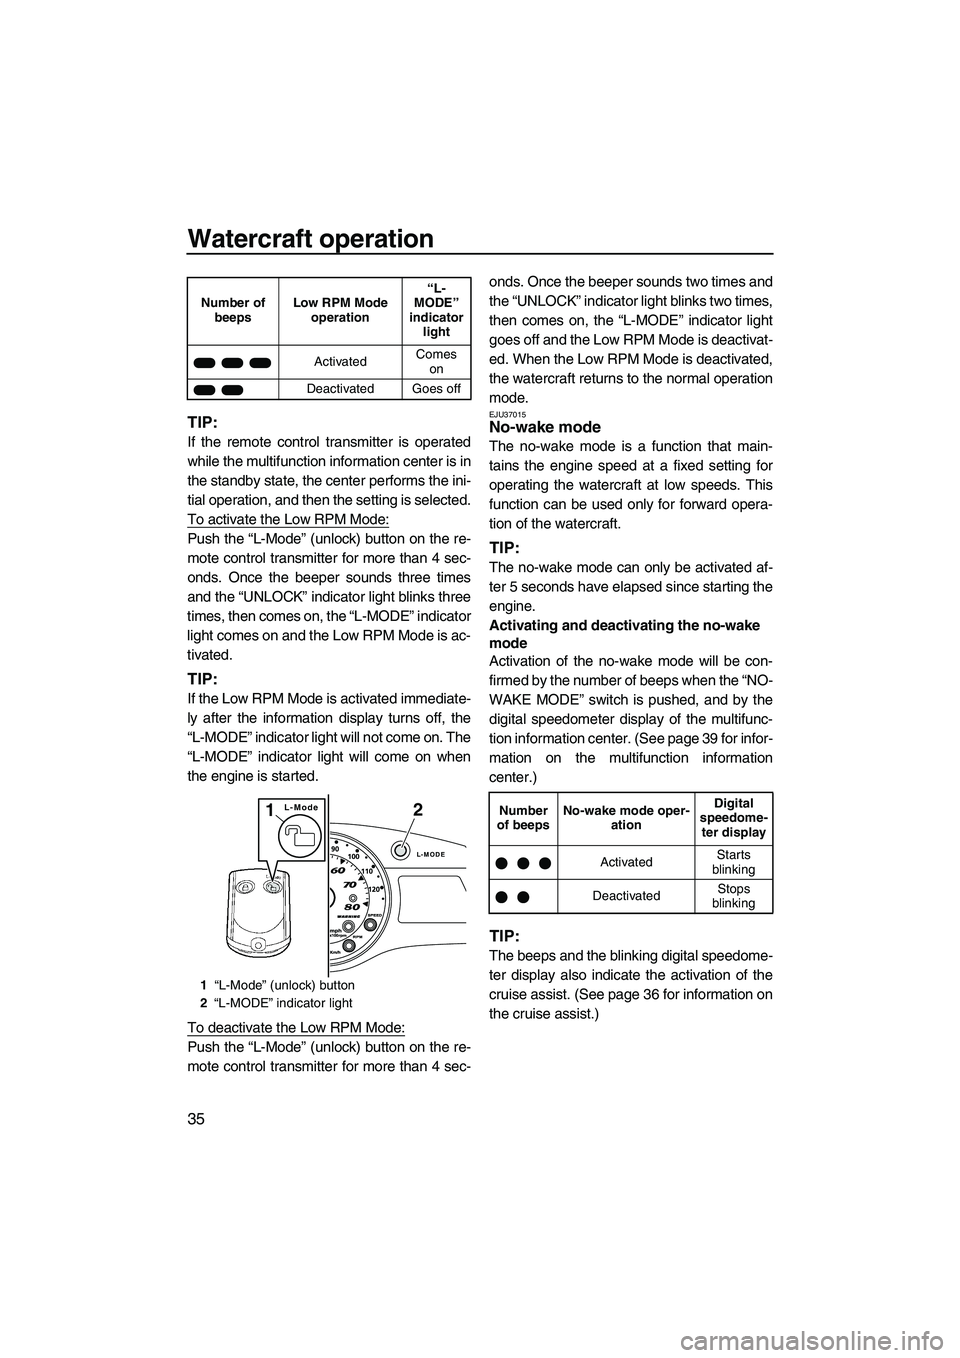 YAMAHA FX SHO 2010  Owners Manual Watercraft operation
35
TIP:
If the remote control transmitter is operated
while the multifunction information center is in
the standby state, the center performs the ini-
tial operation, and then the